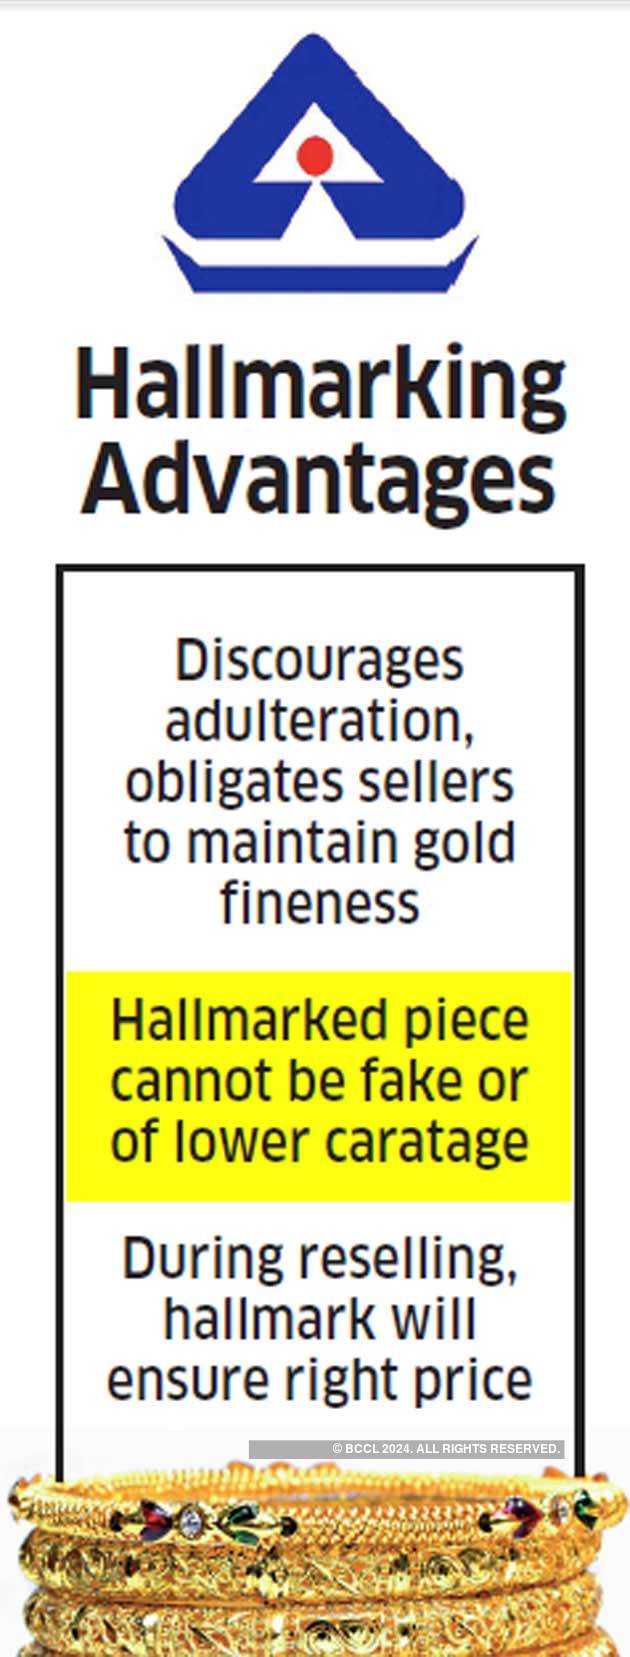 Six Digit BIS hallmark compulsory for Sale of Gold Jewellery from April 1